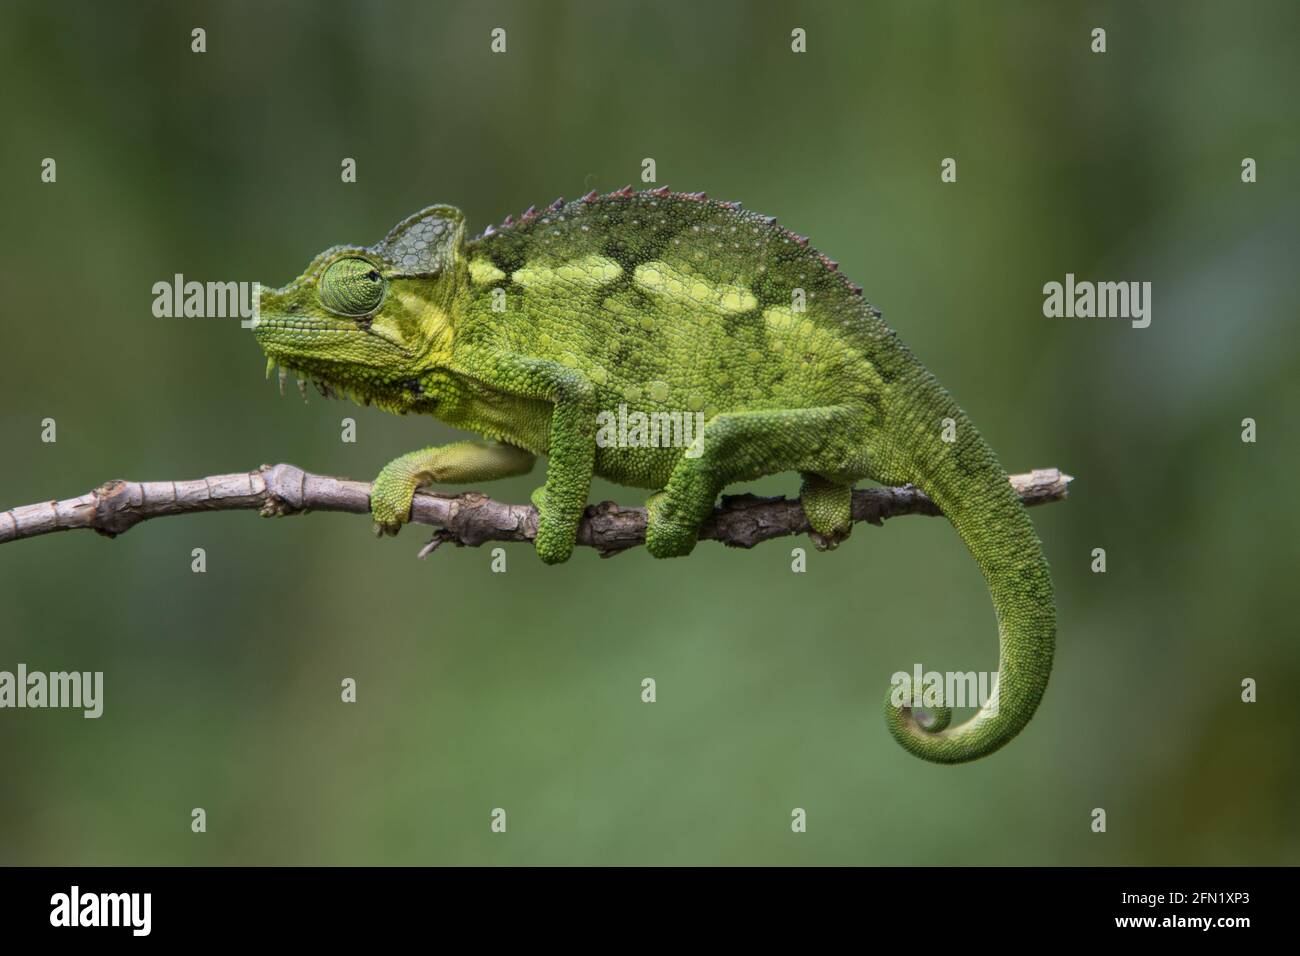 Green cameleon sits on a thin branch against a soft green background Stock Photo